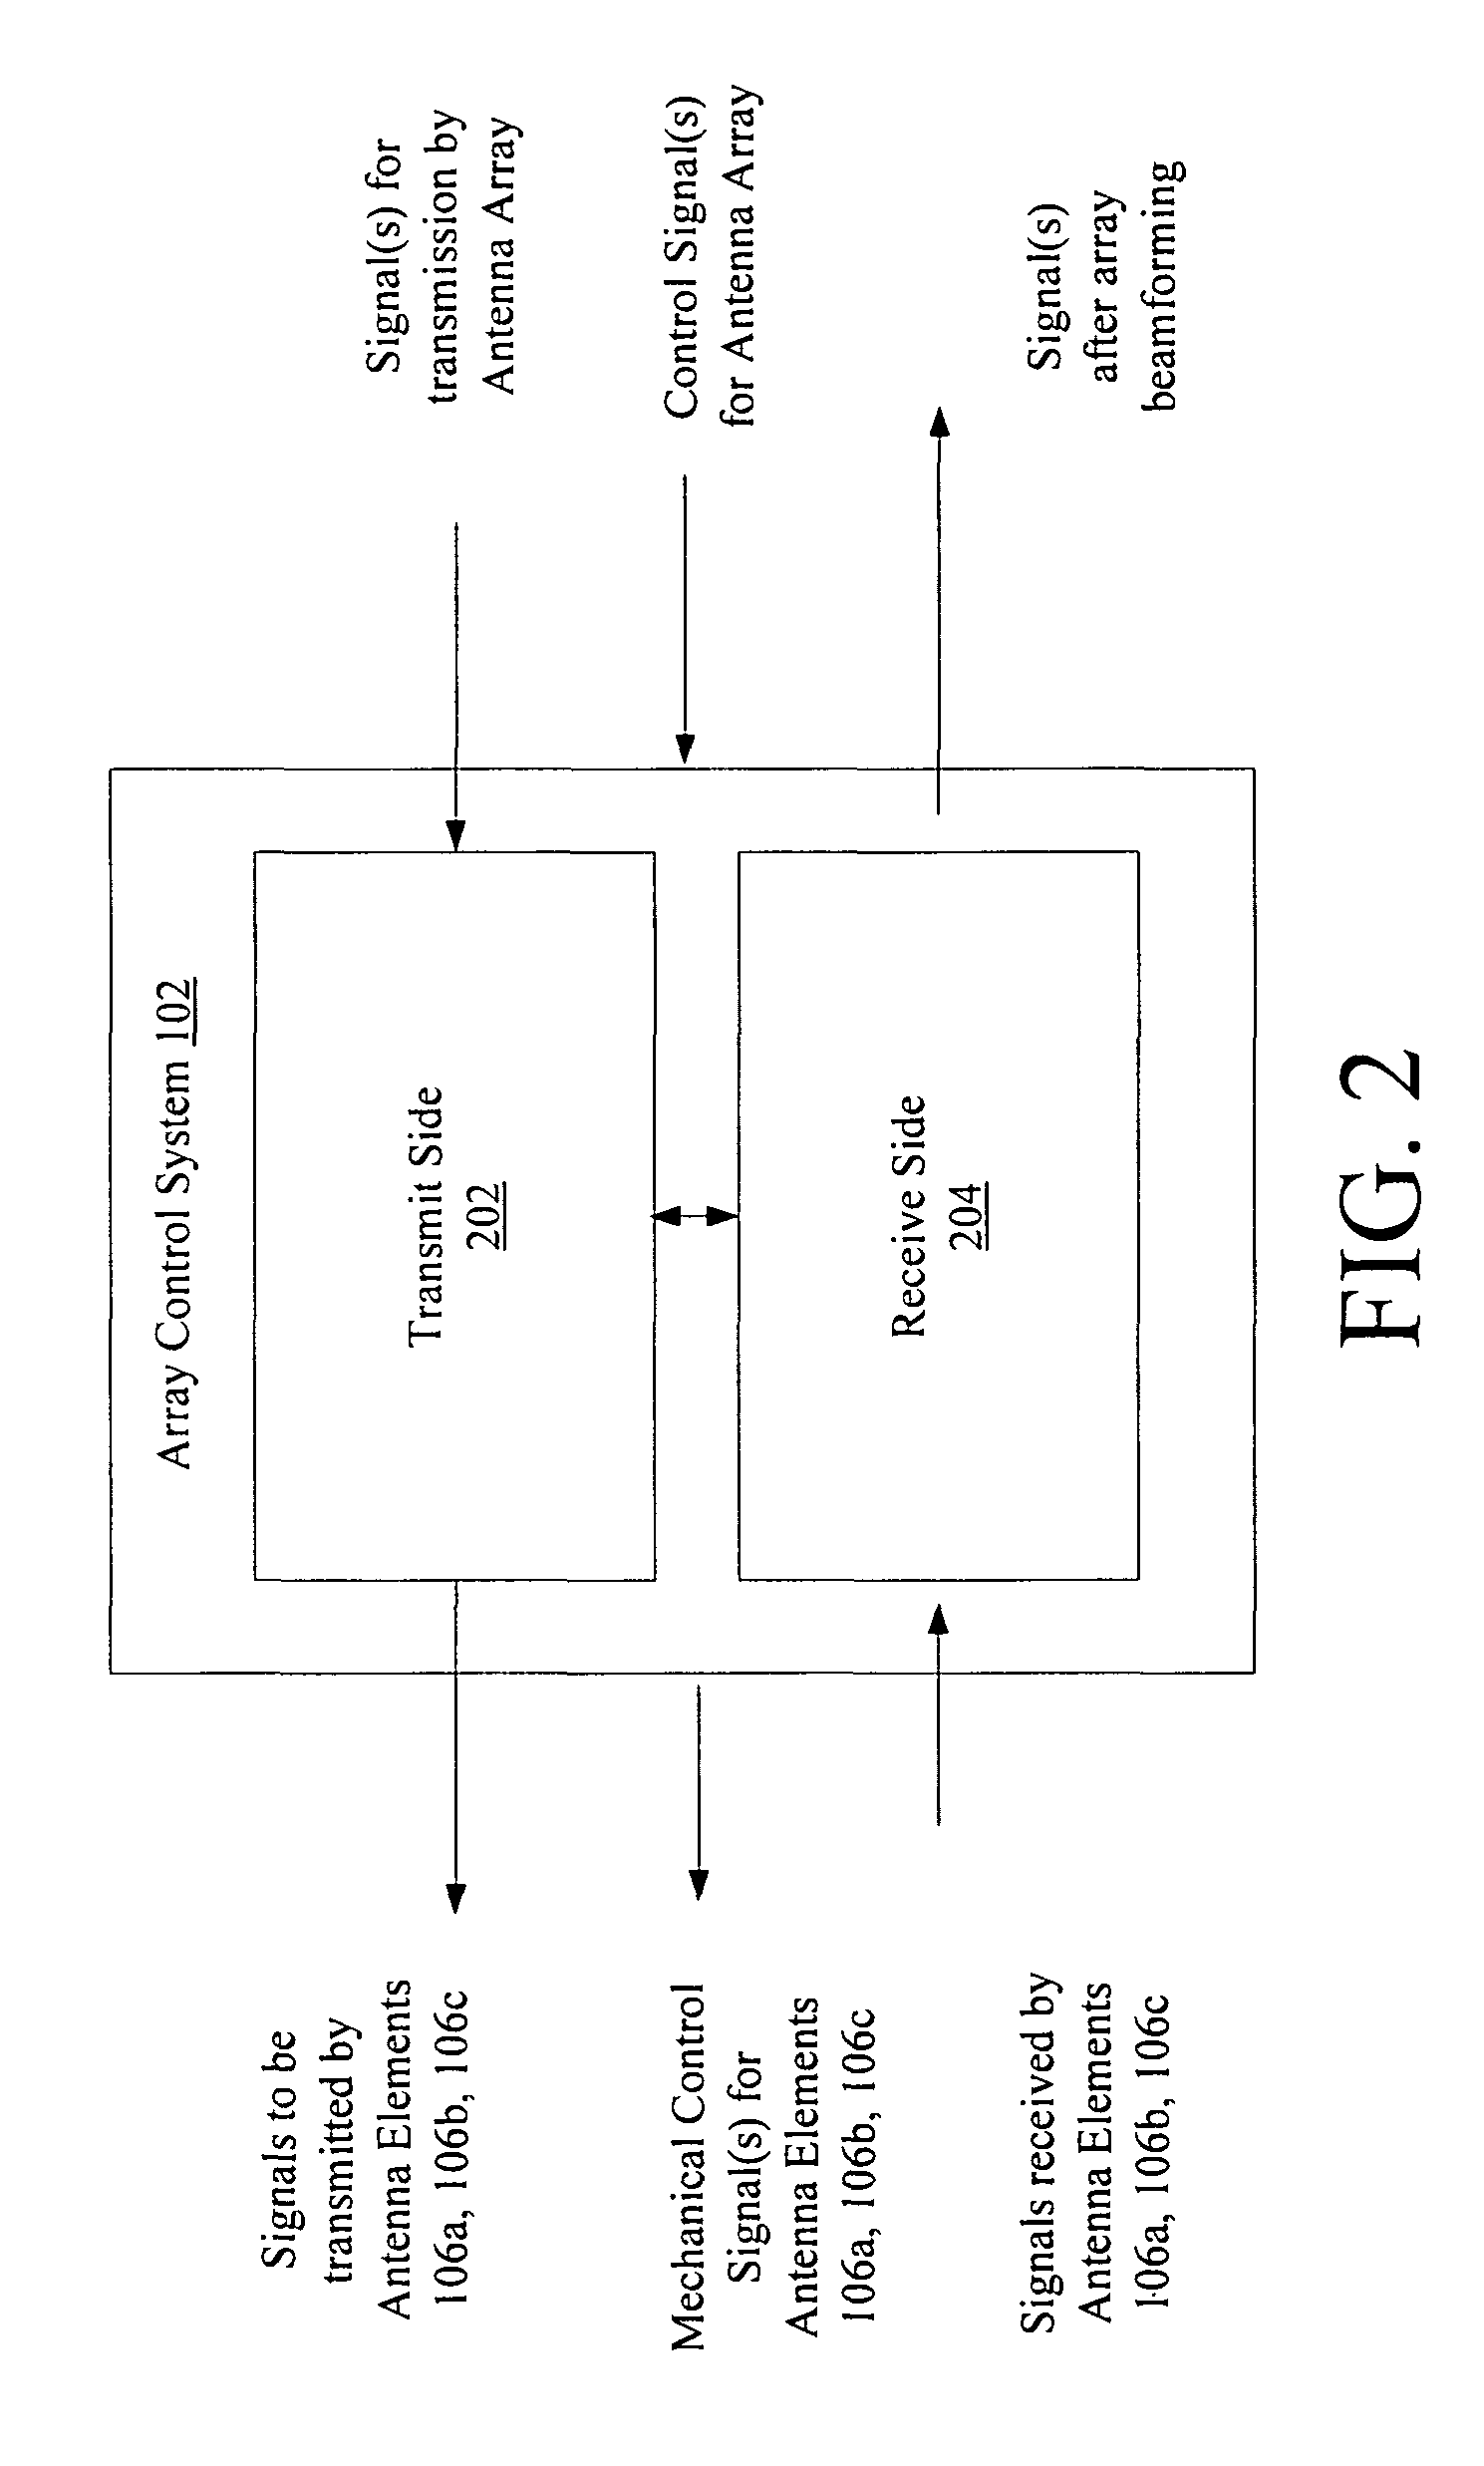 Systems and methods for compensating for transmission phasing errors in a communications system using a receive signal